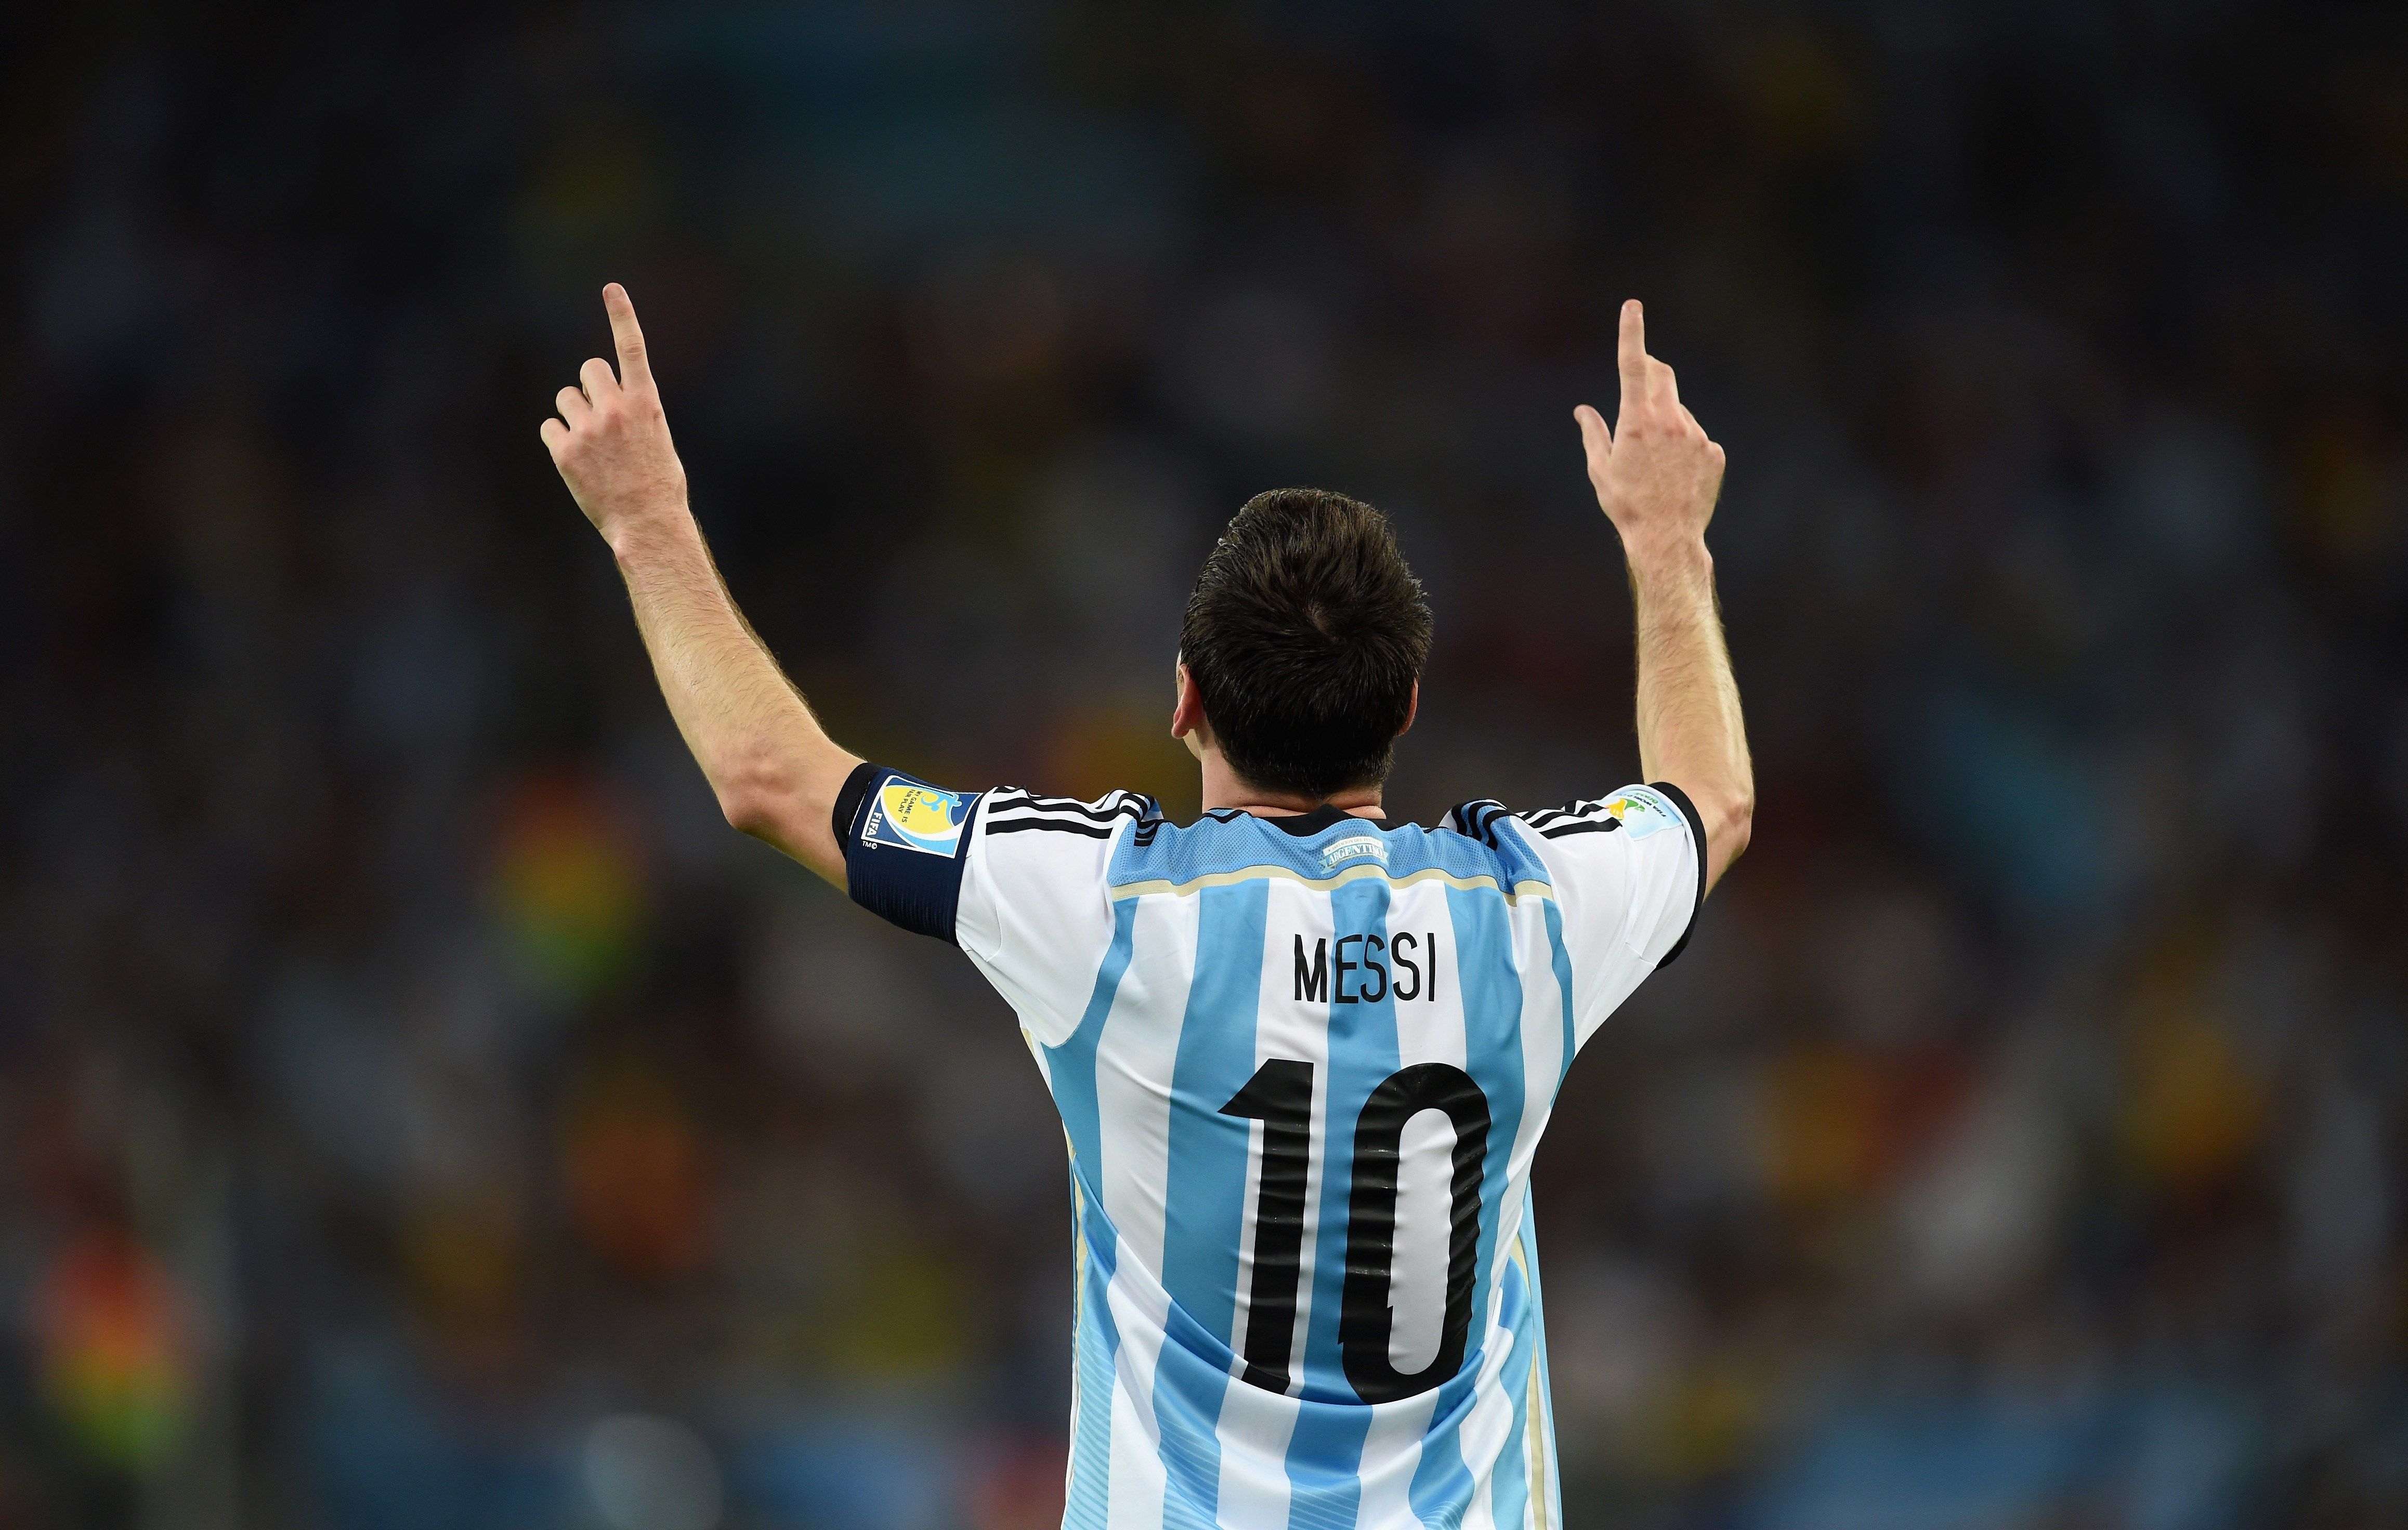 lionel messi 4k ultra hd wallpapers » High quality walls